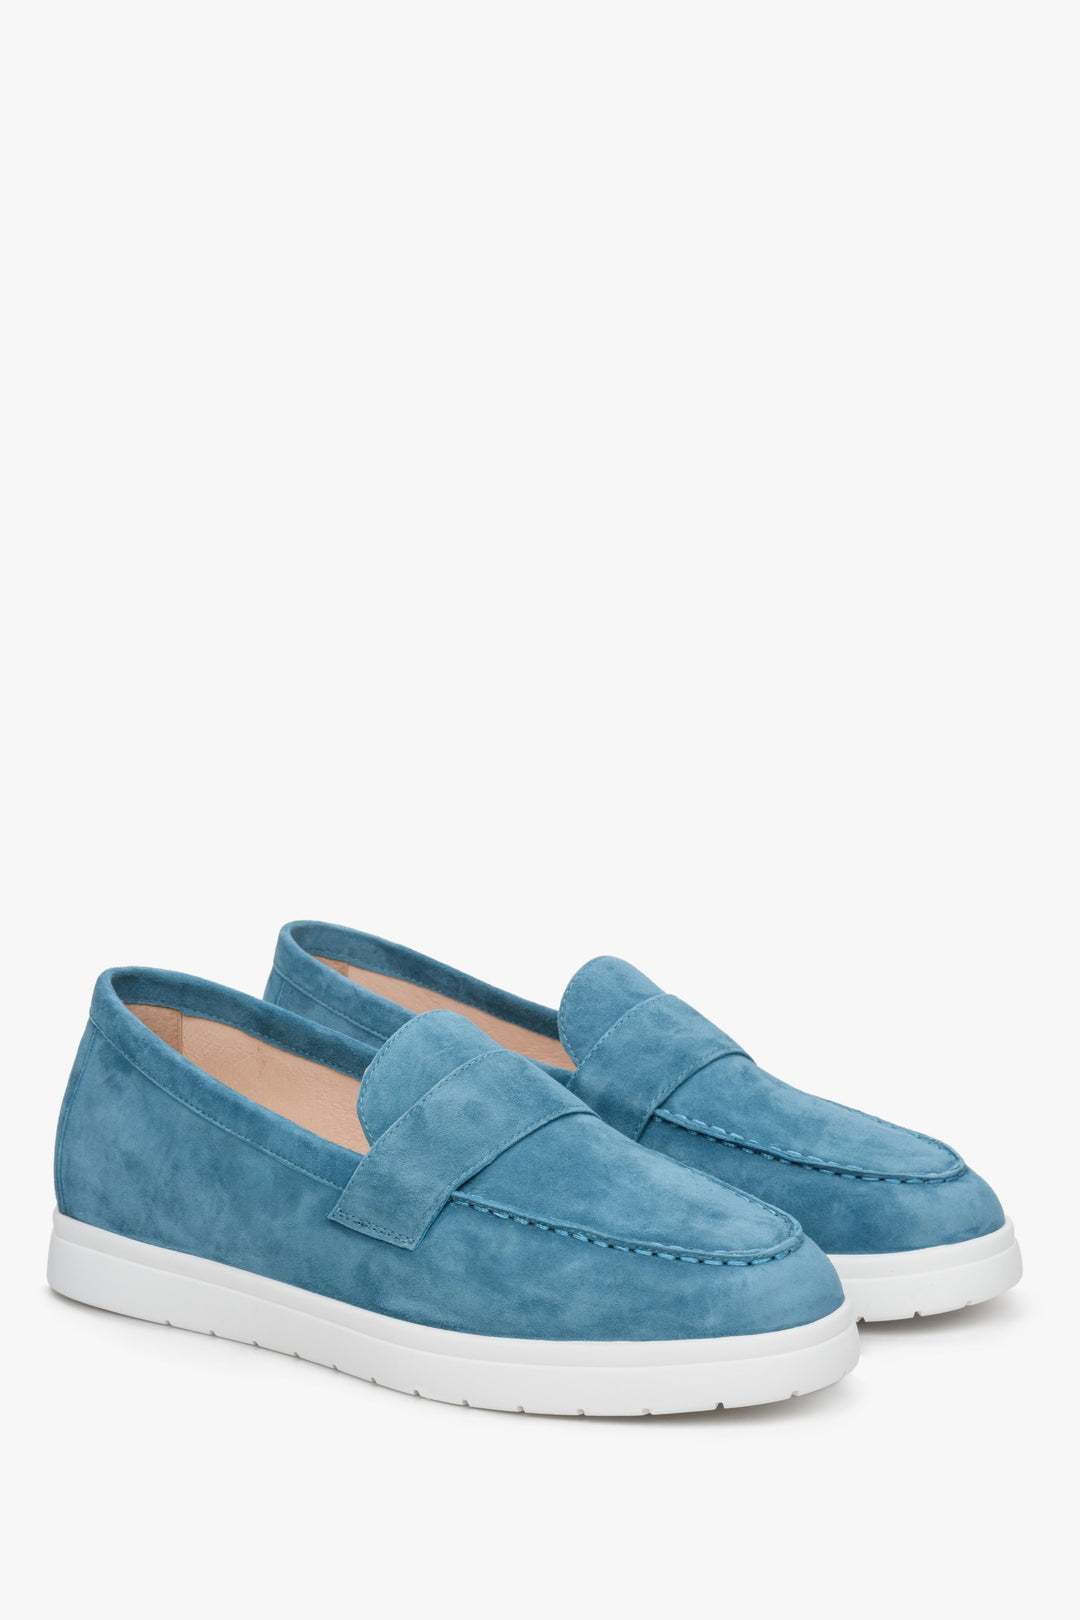 Blue women's moccasins made of genuine velour - presentation of the toe and side vamp.